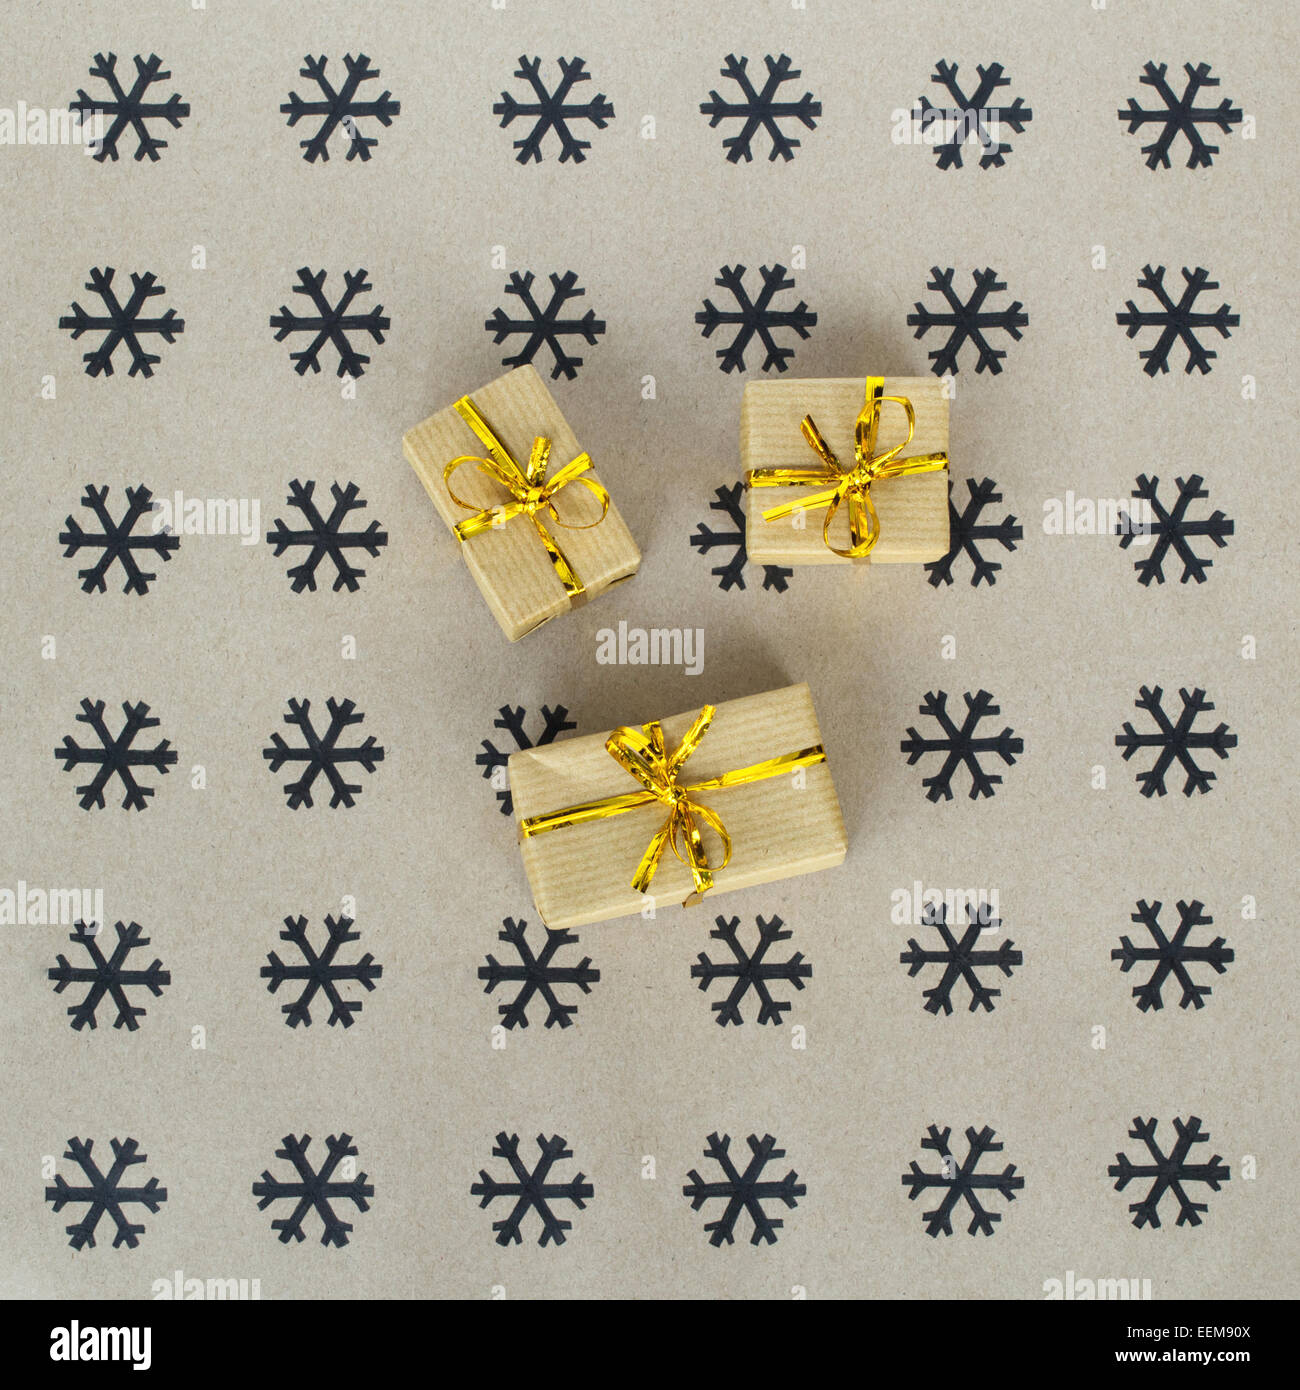 511+ Thousand Christmas Wrapping Paper Royalty-Free Images, Stock